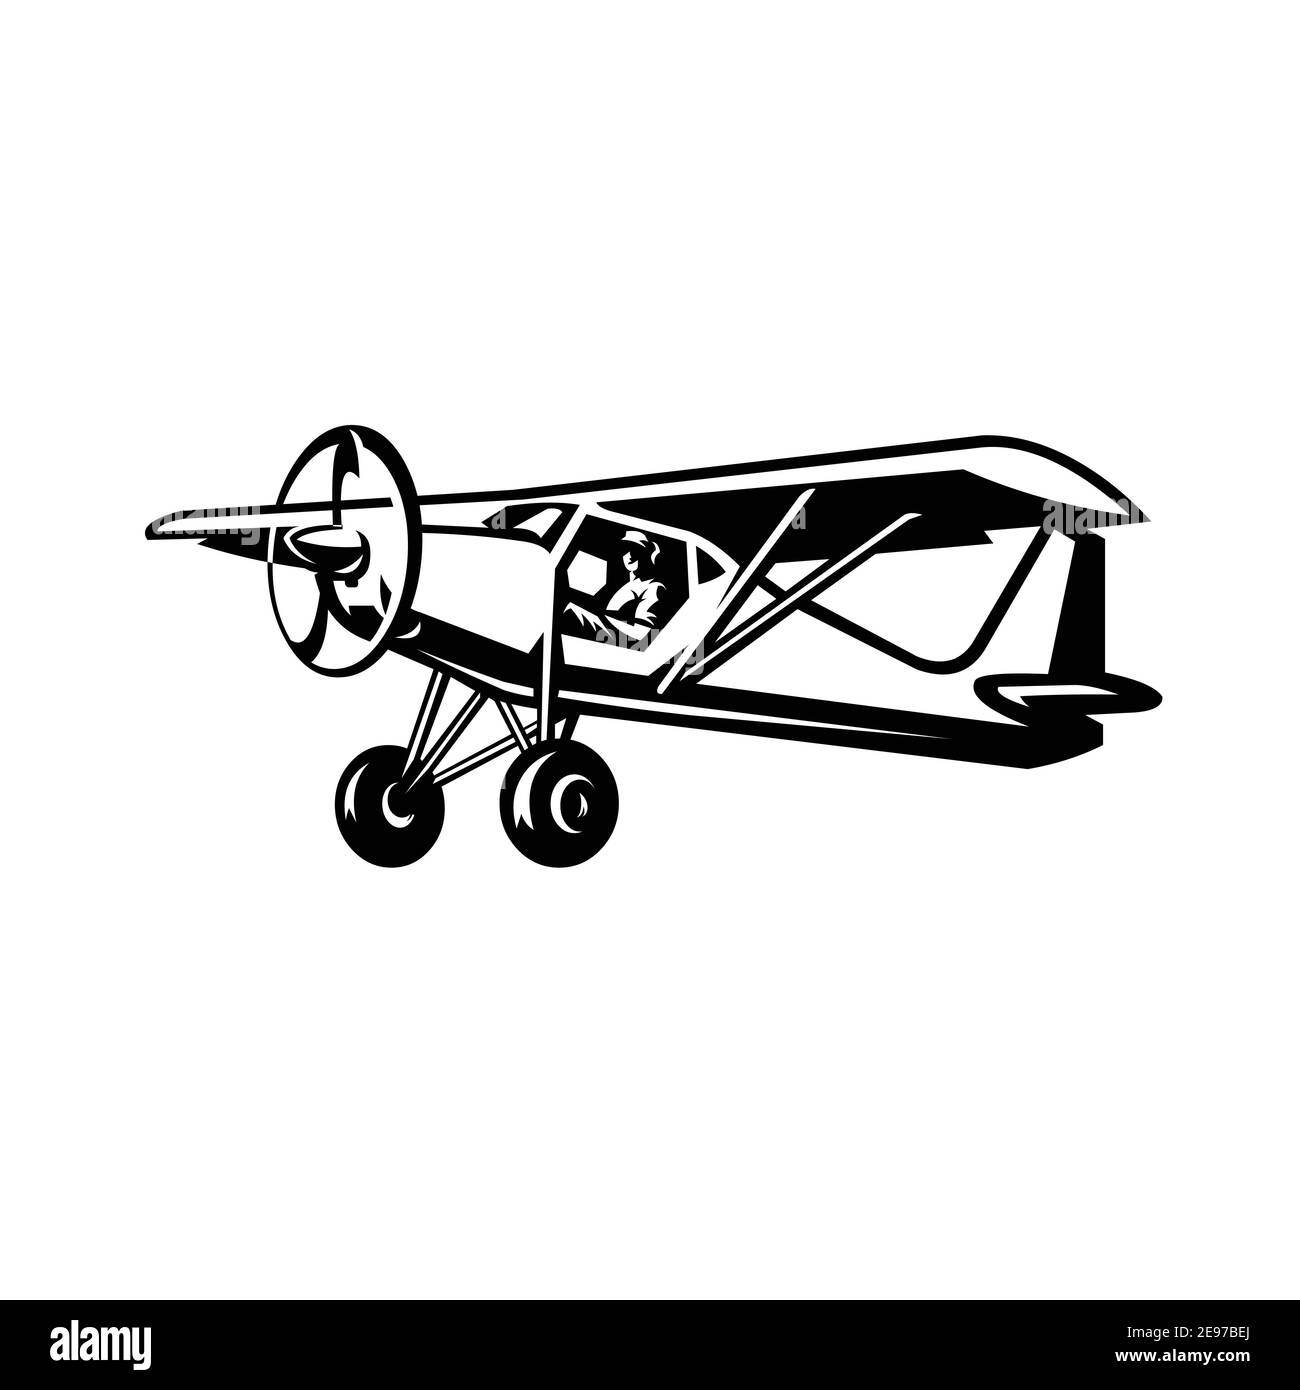 Short Takeoff and Landing aircraft, small plane, STOL airplane vector isolated Stock Vector